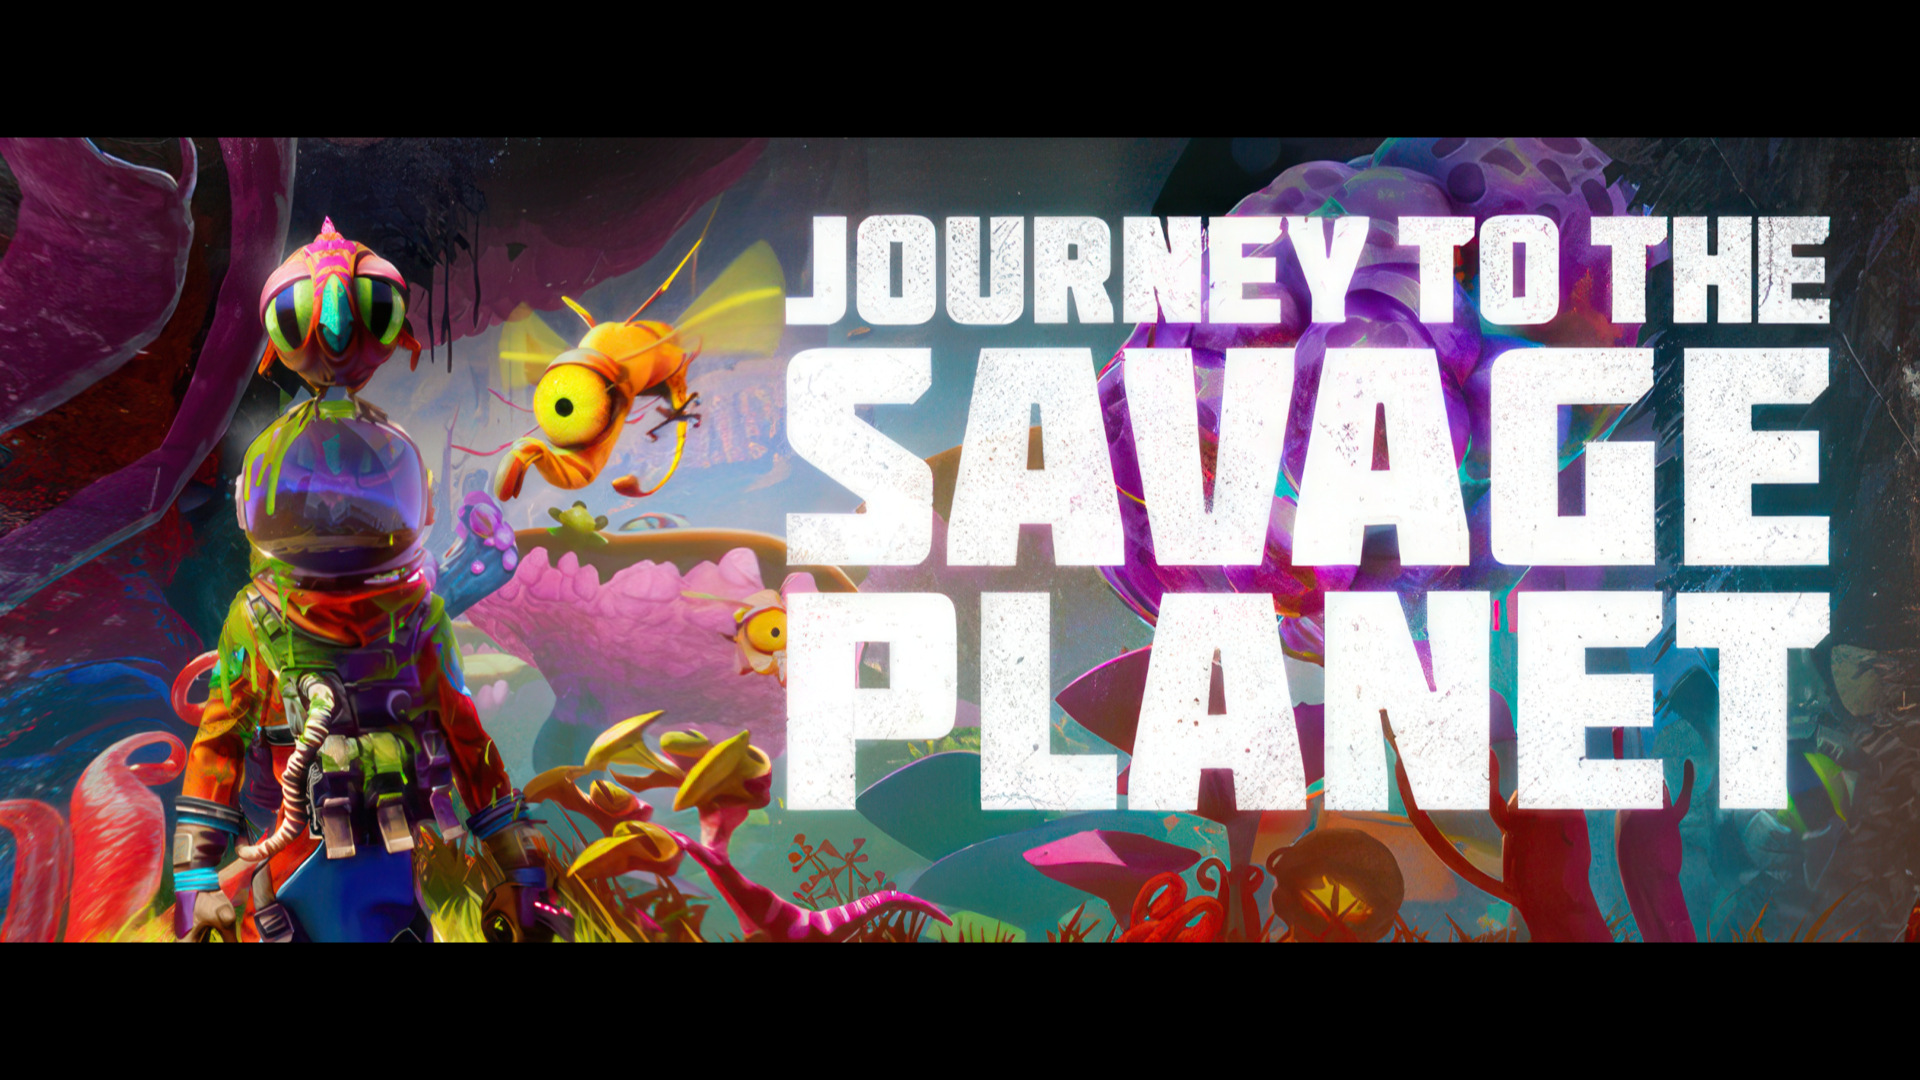 JOURNEY TO THE SAVAGE PLANET